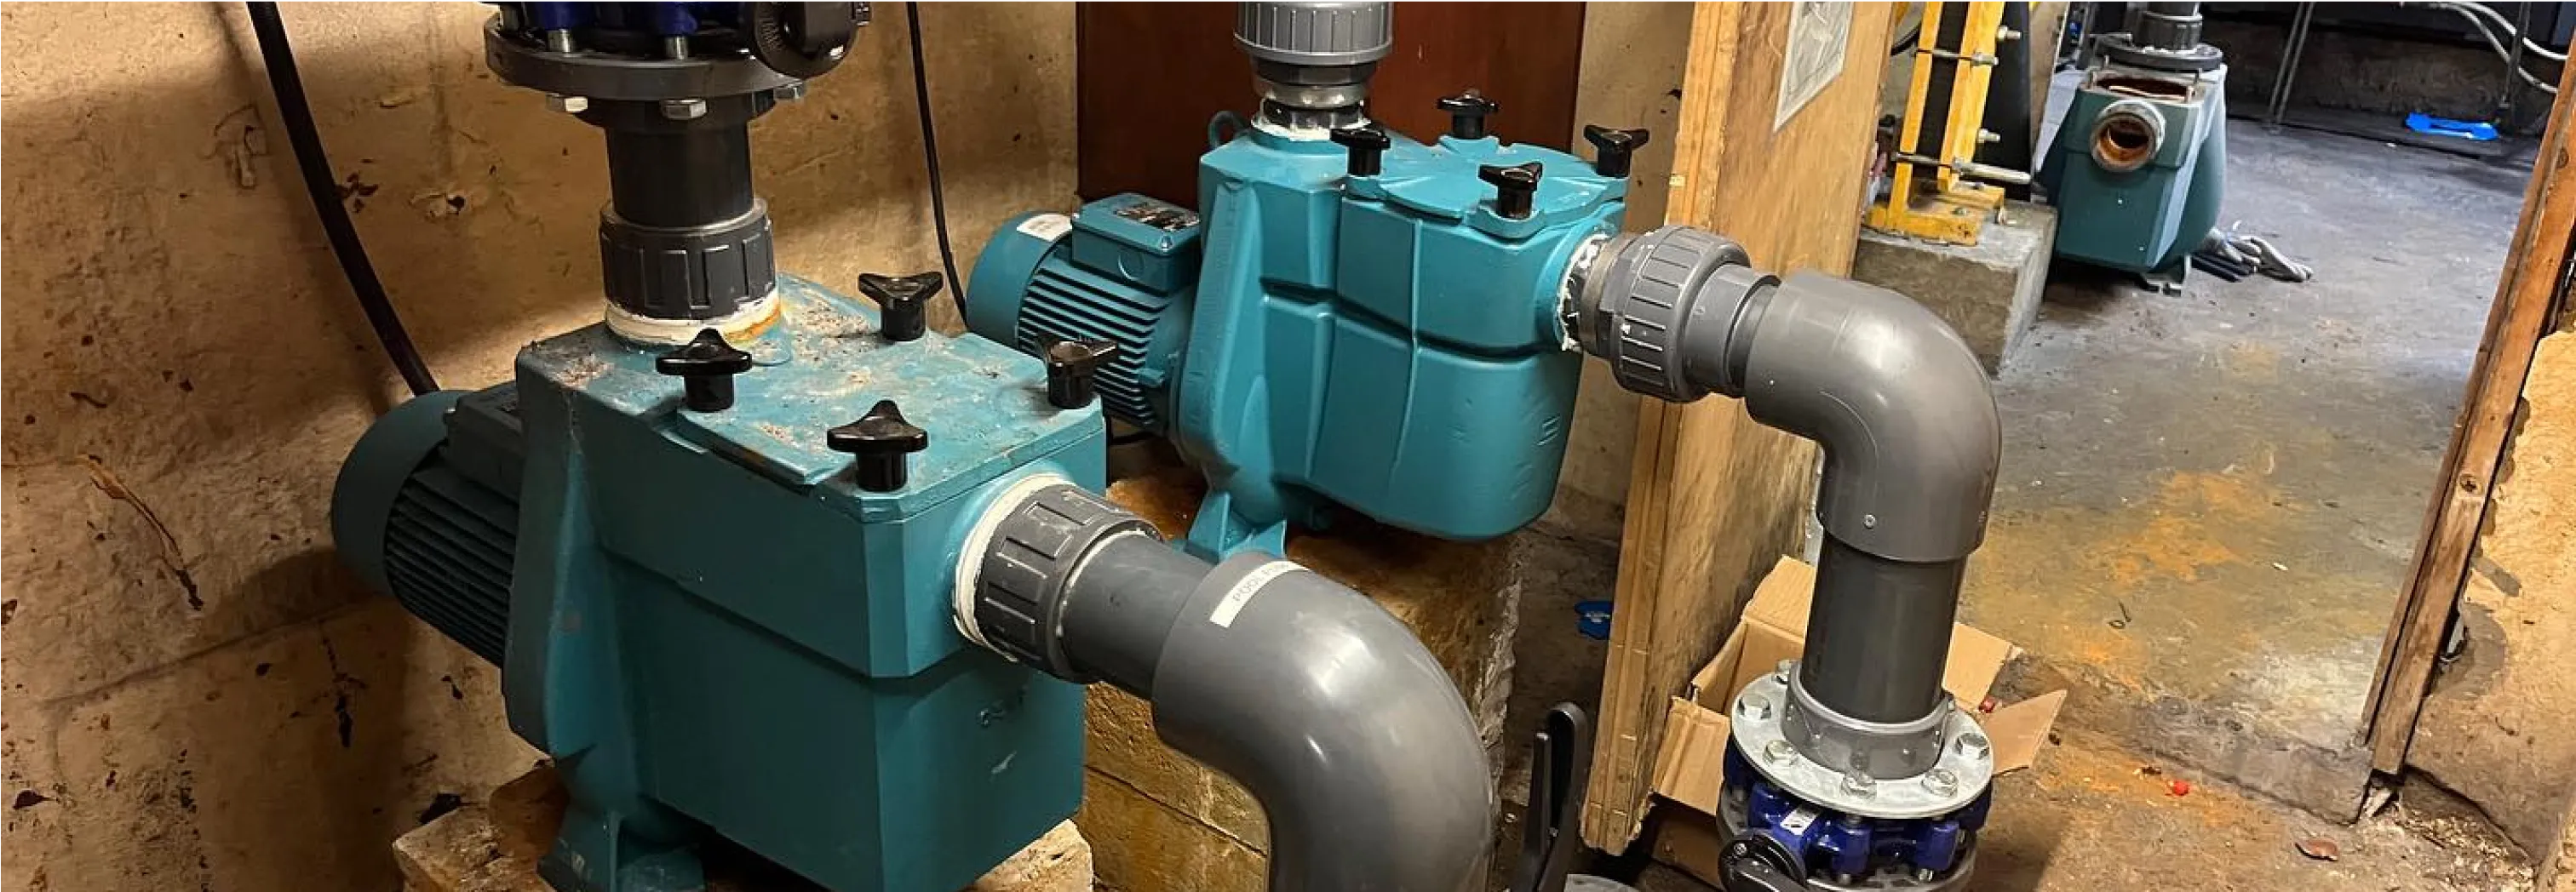 Hotel Swimming Pool Pump Replacement